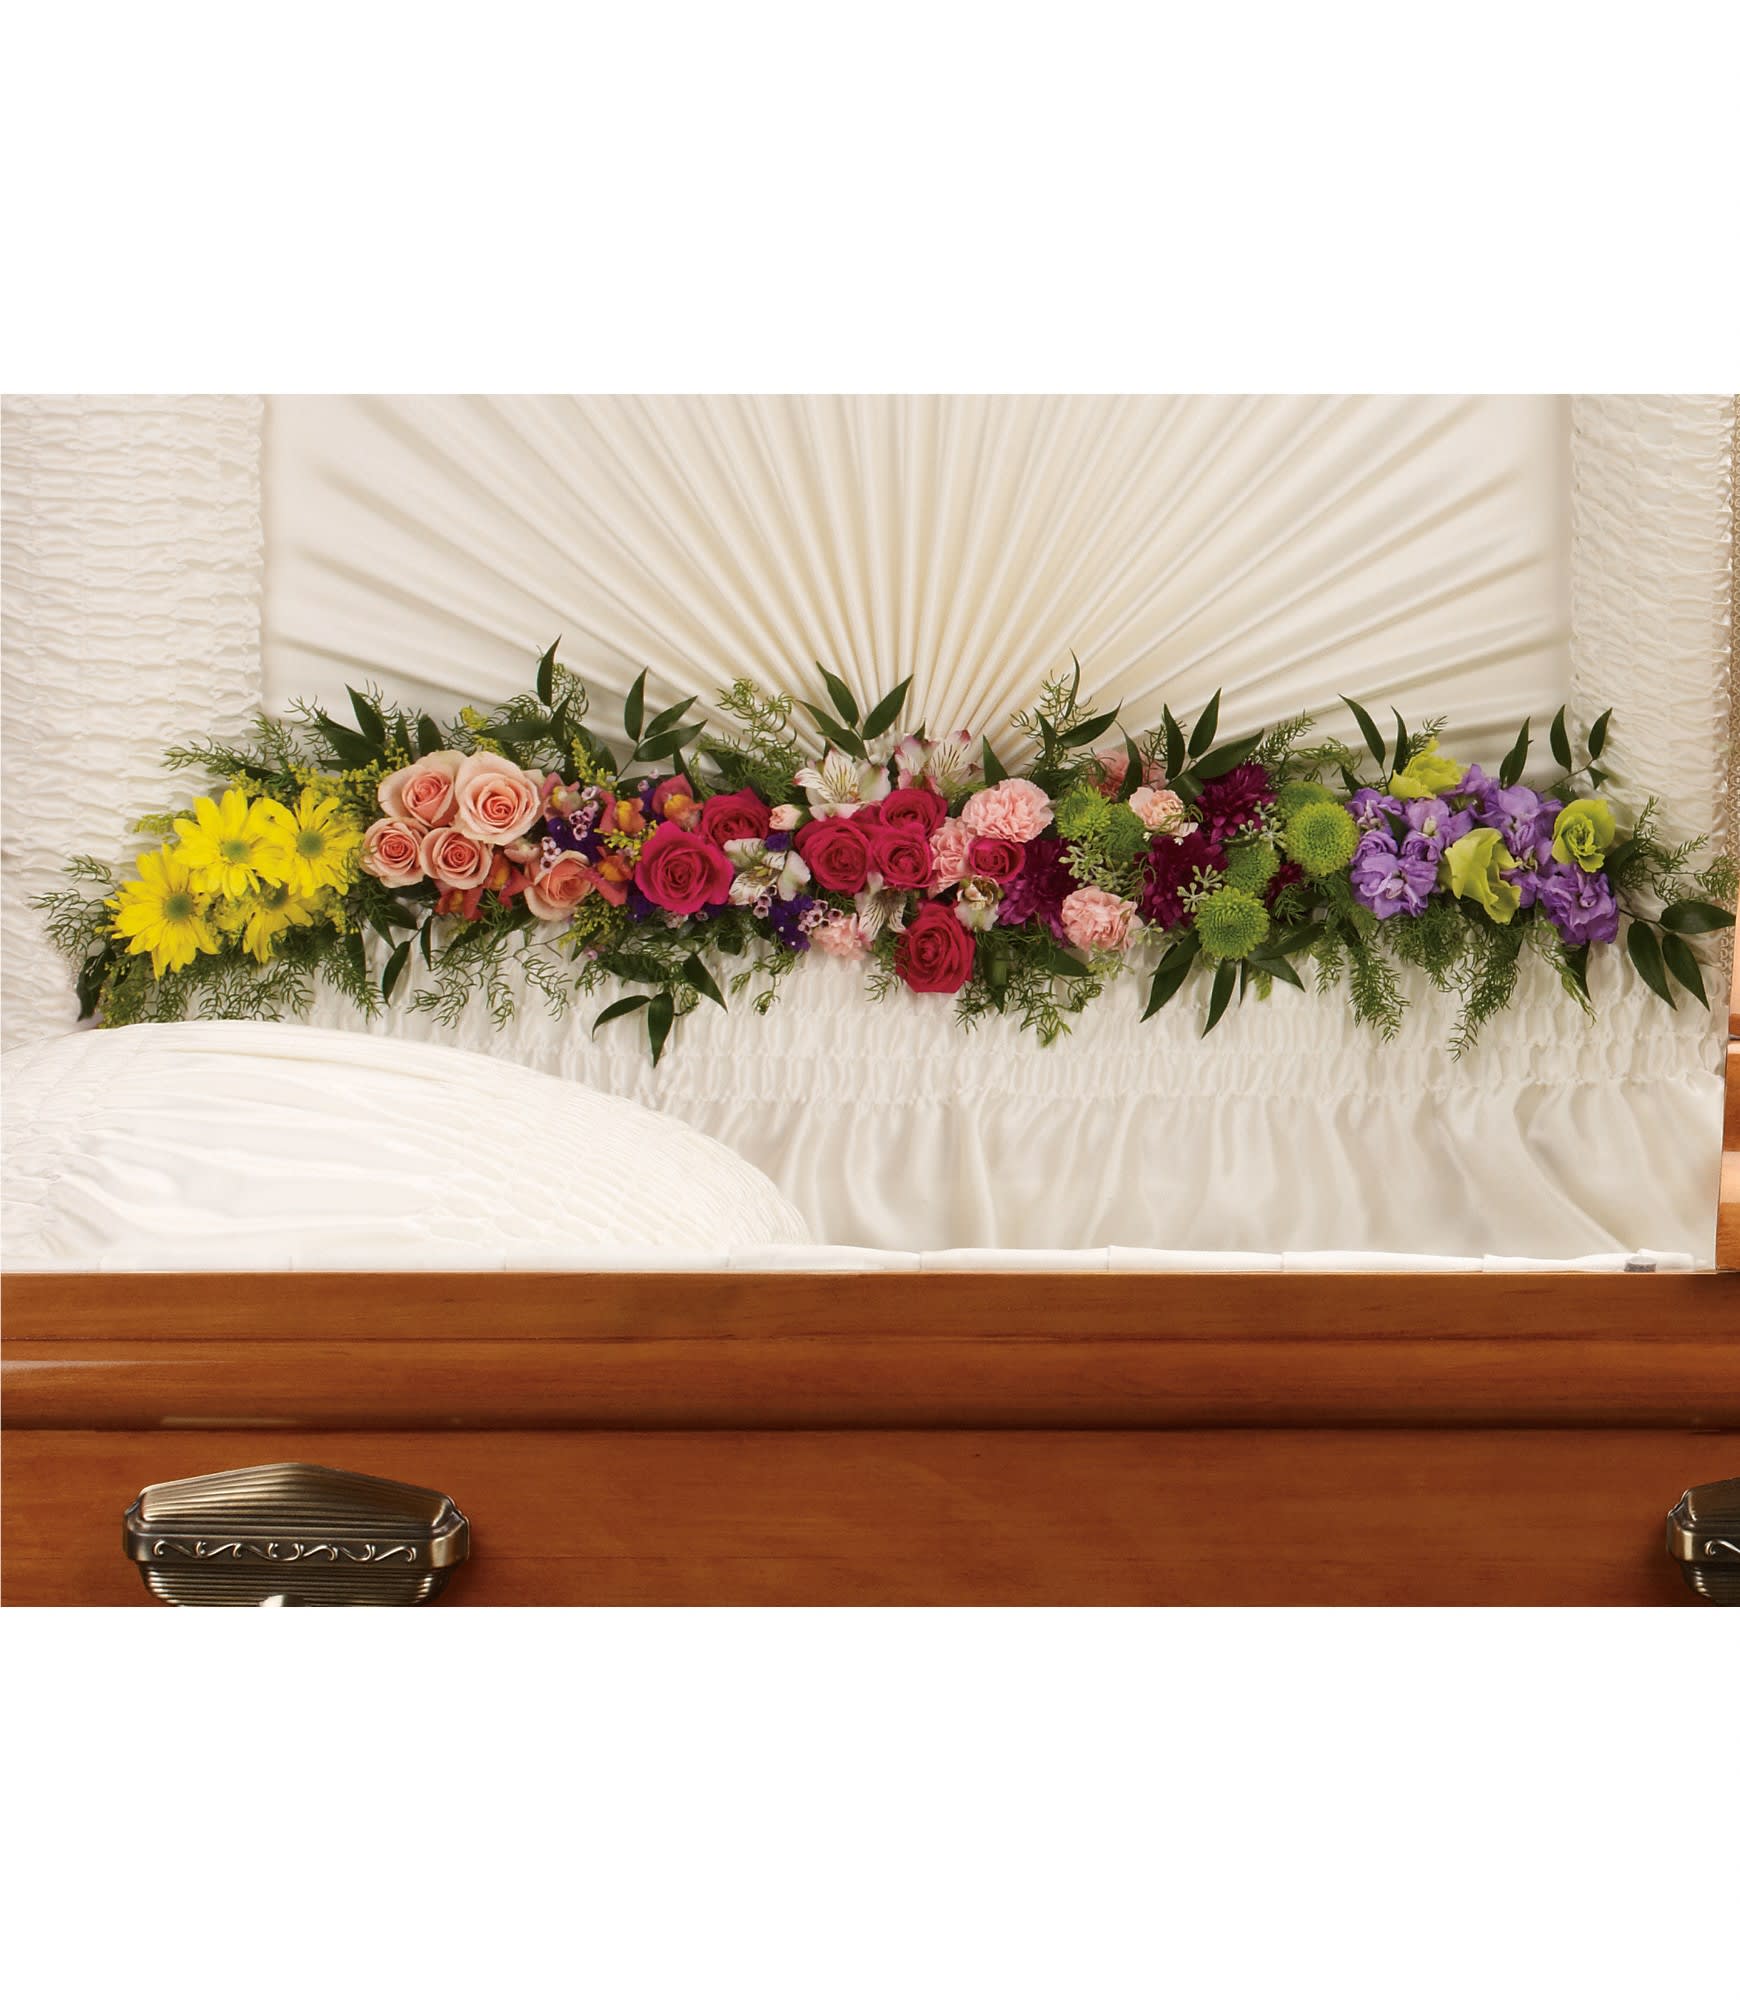 Glorious Memories Garland by Teleflora - Create a beautiful resting place with this magnificent garland of roses and other floral favorites artistically placed at the base of the casket lid.  